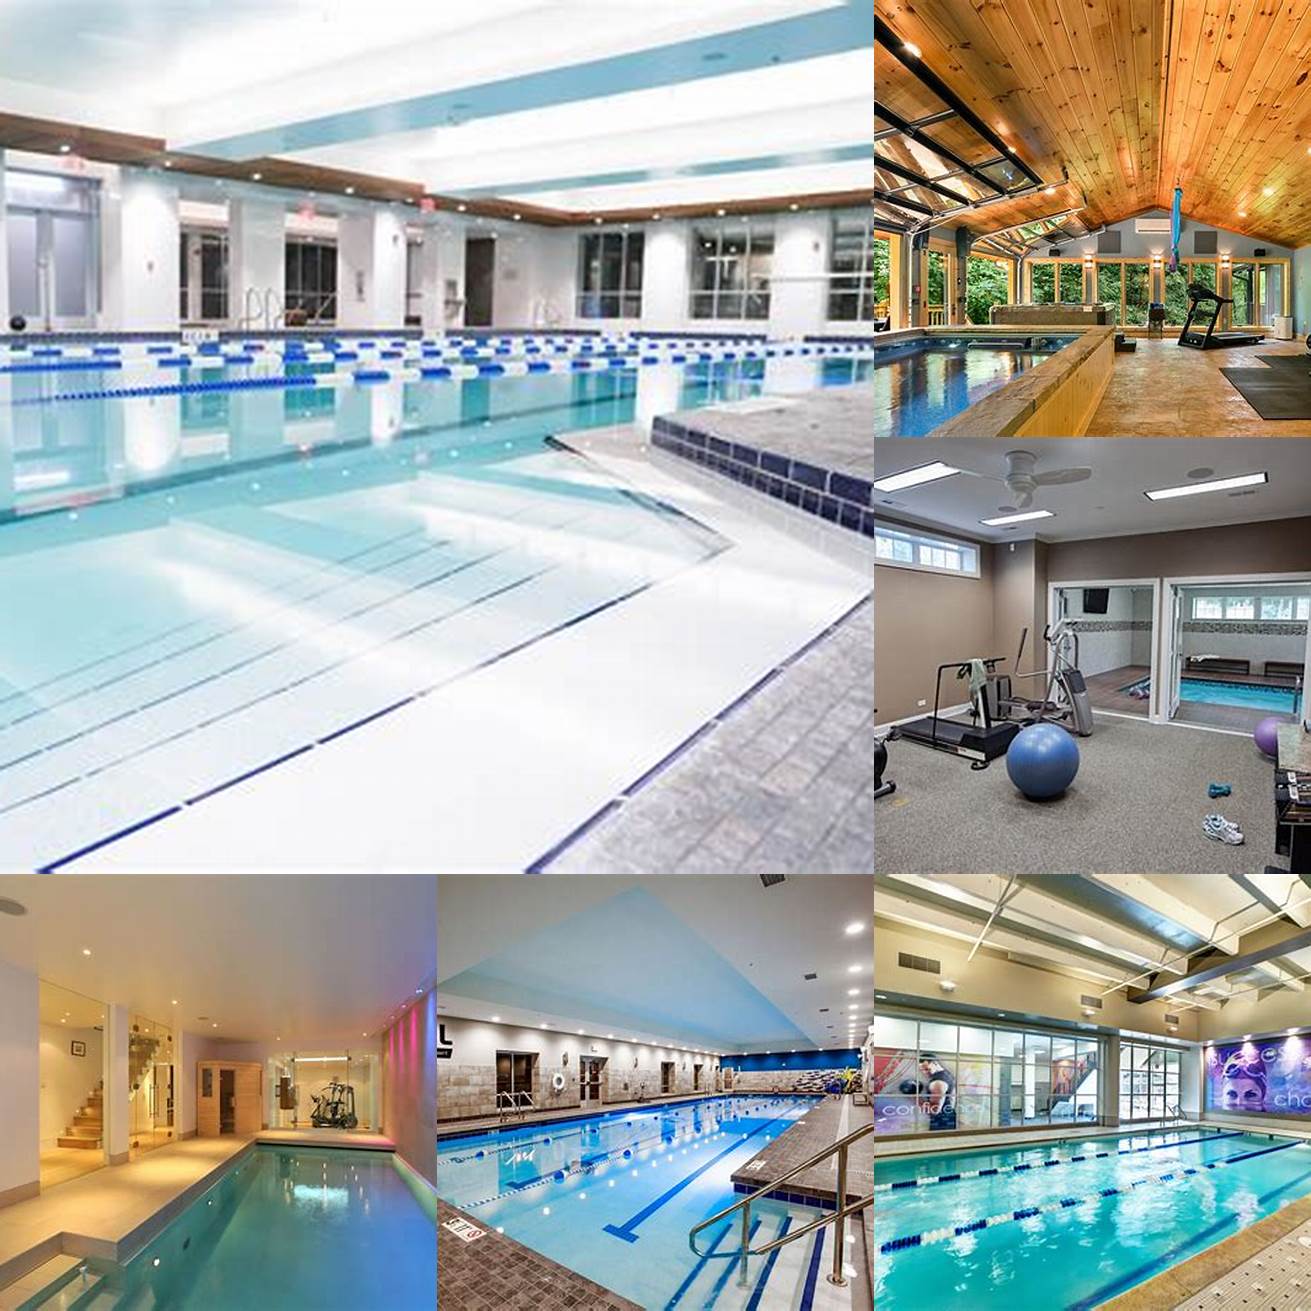 A photo of a community pool or gym